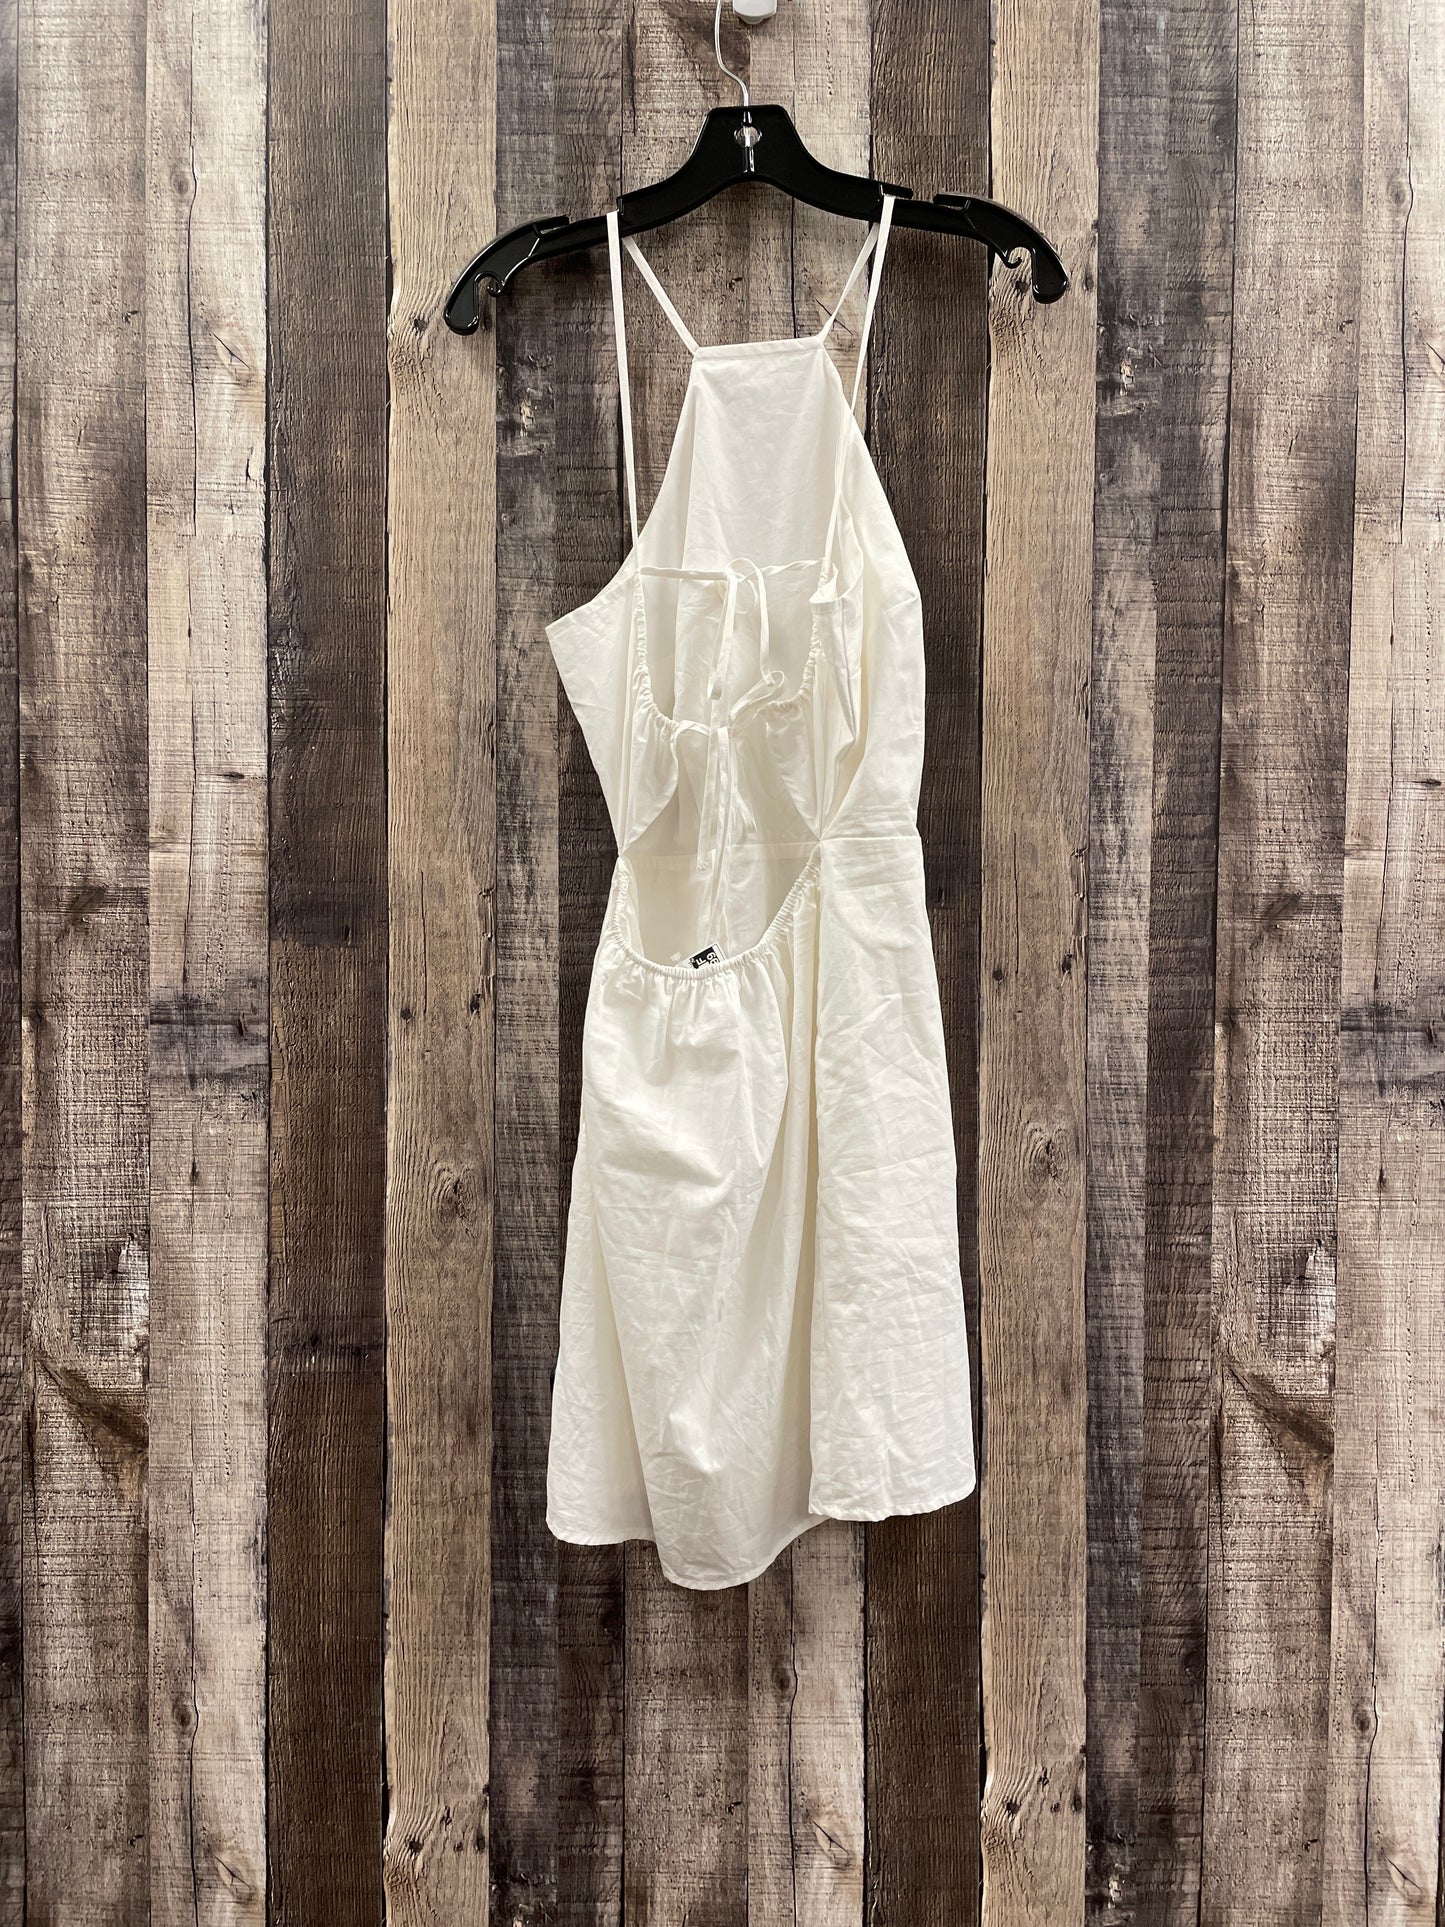 White Dress Casual Short A New Day, Size Xs